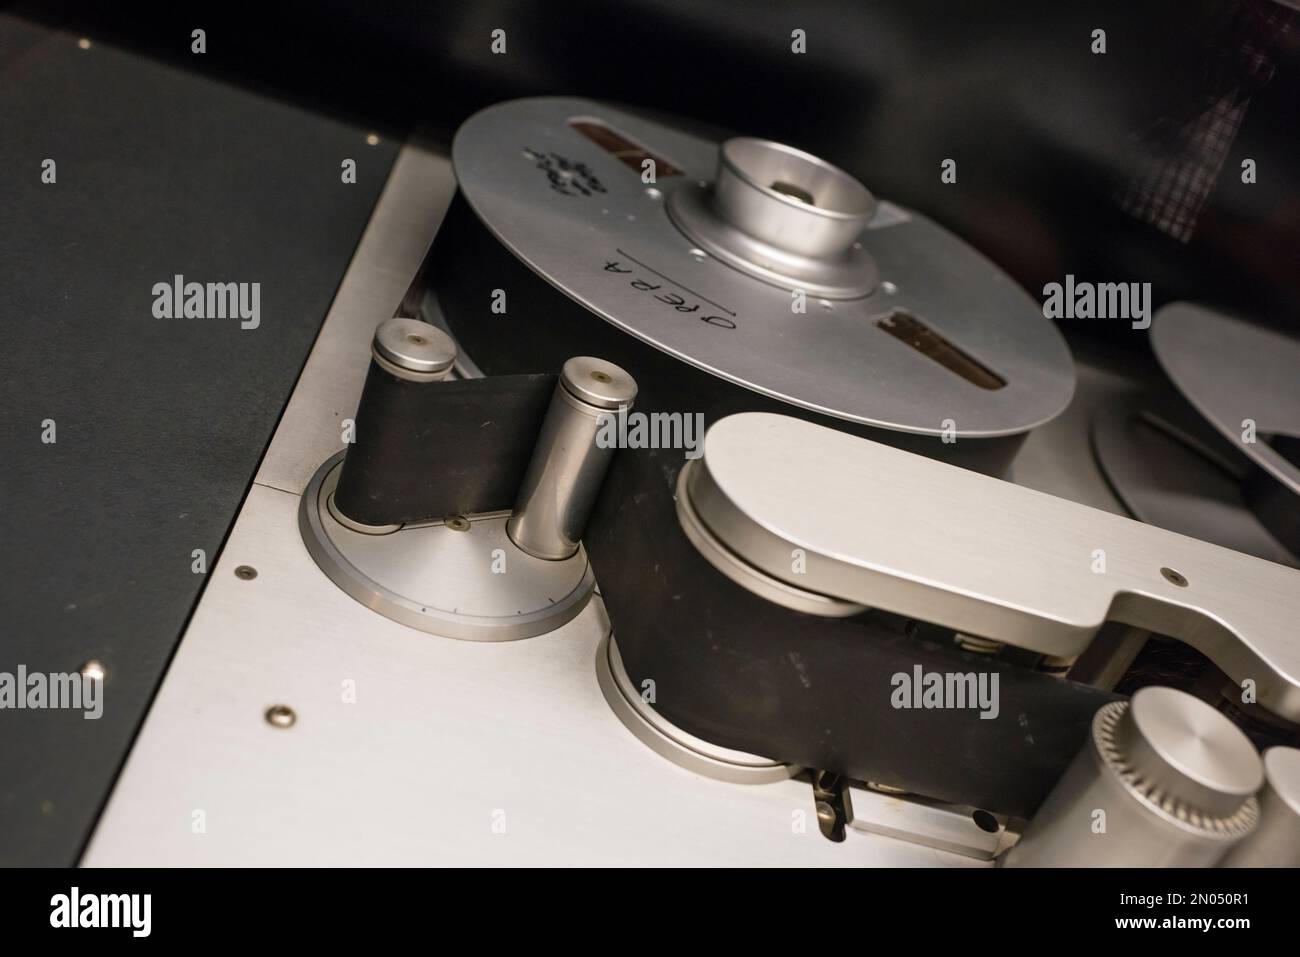 Vintage analog audio recording tape and other sound equipment in a professional music recording studio Stock Photo